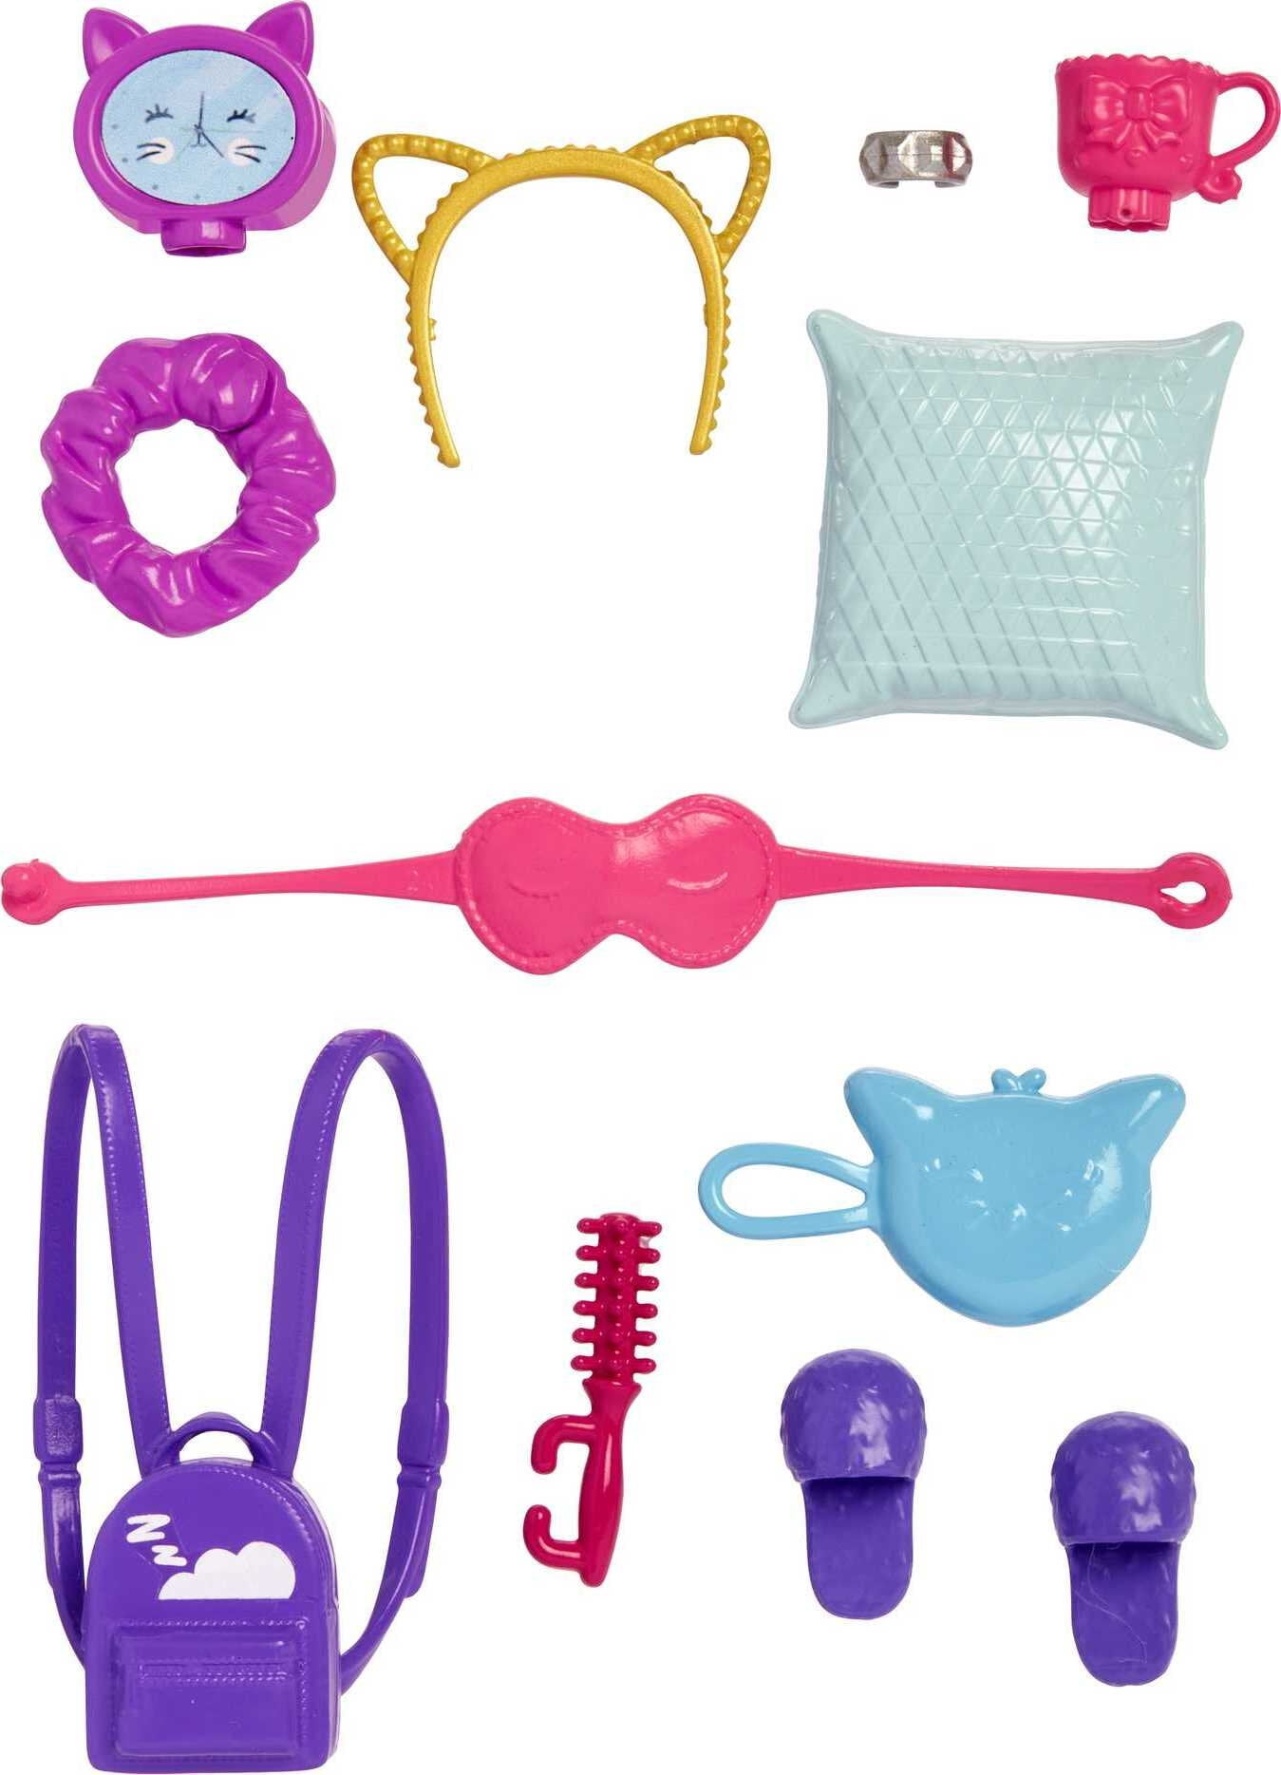 accessories for barbies Bulan 2 Barbie Accessory Pack,  Sleepover-Themed Storytelling Pieces for Slumber  Party